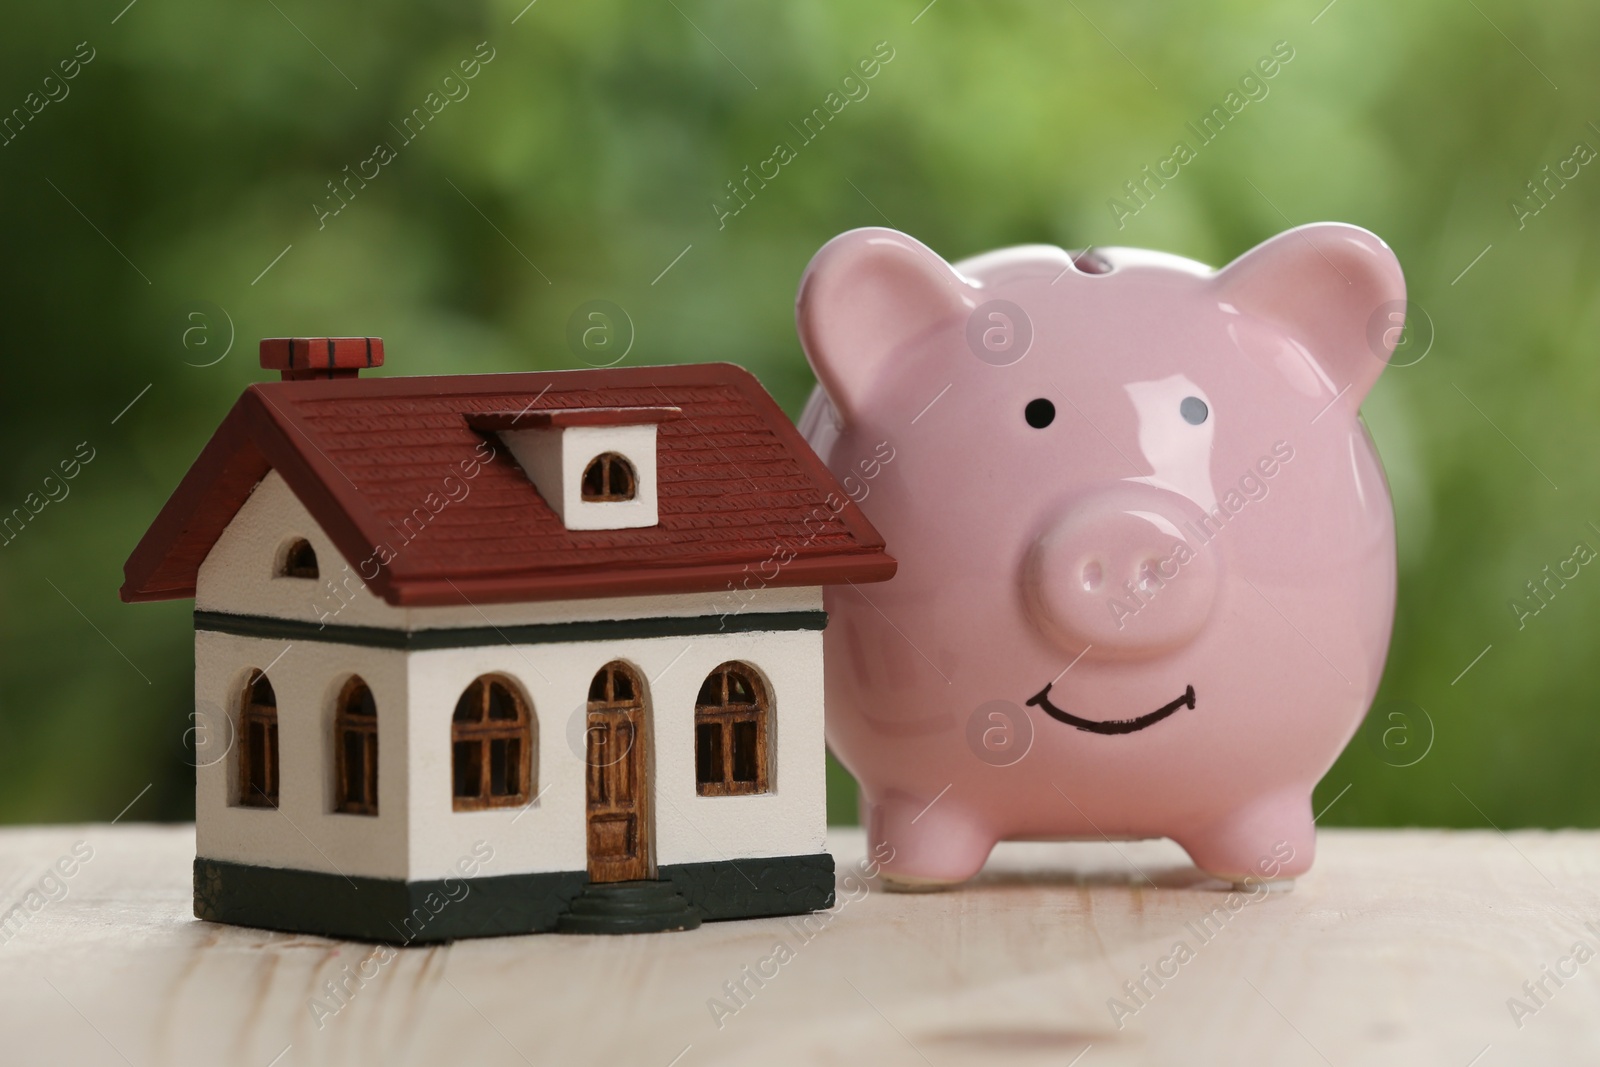 Photo of Piggy bank and little house toy on wooden table outdoors